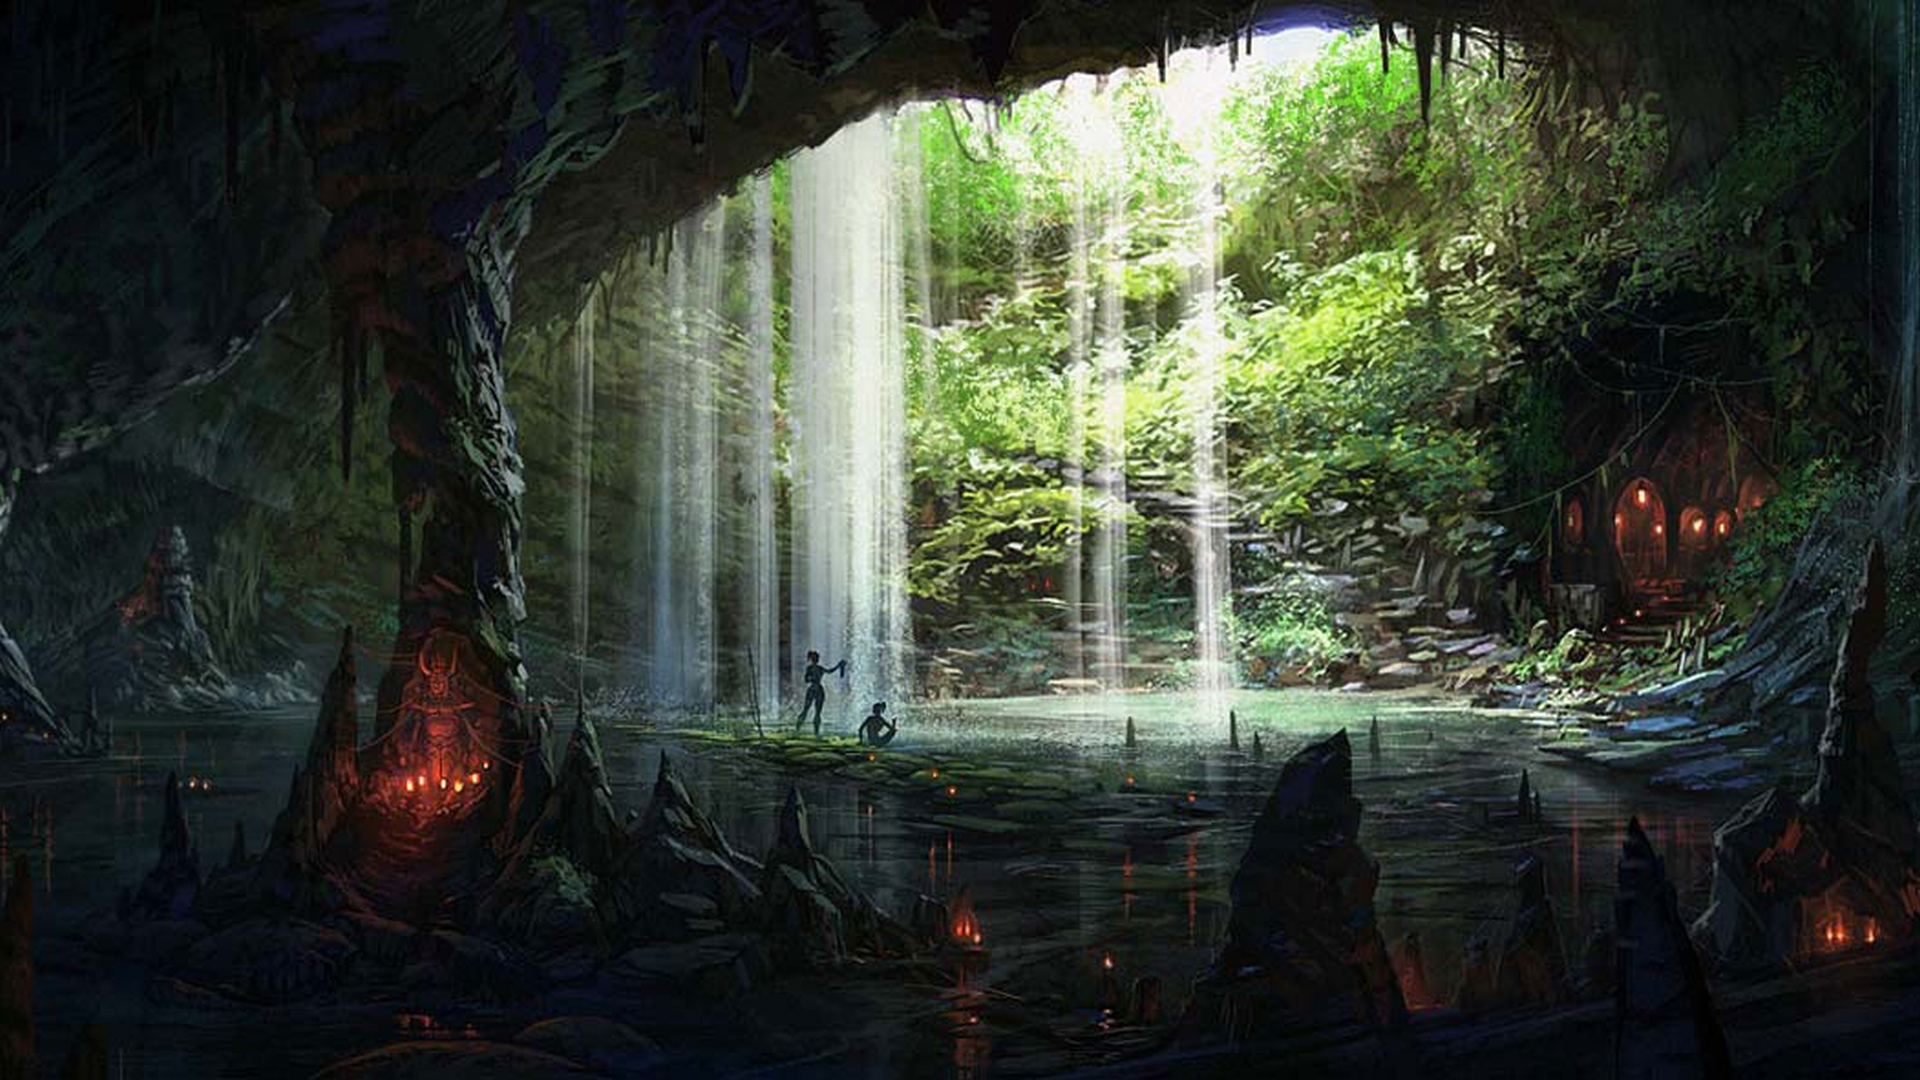 Cave Wallpapers, Pictures, Images